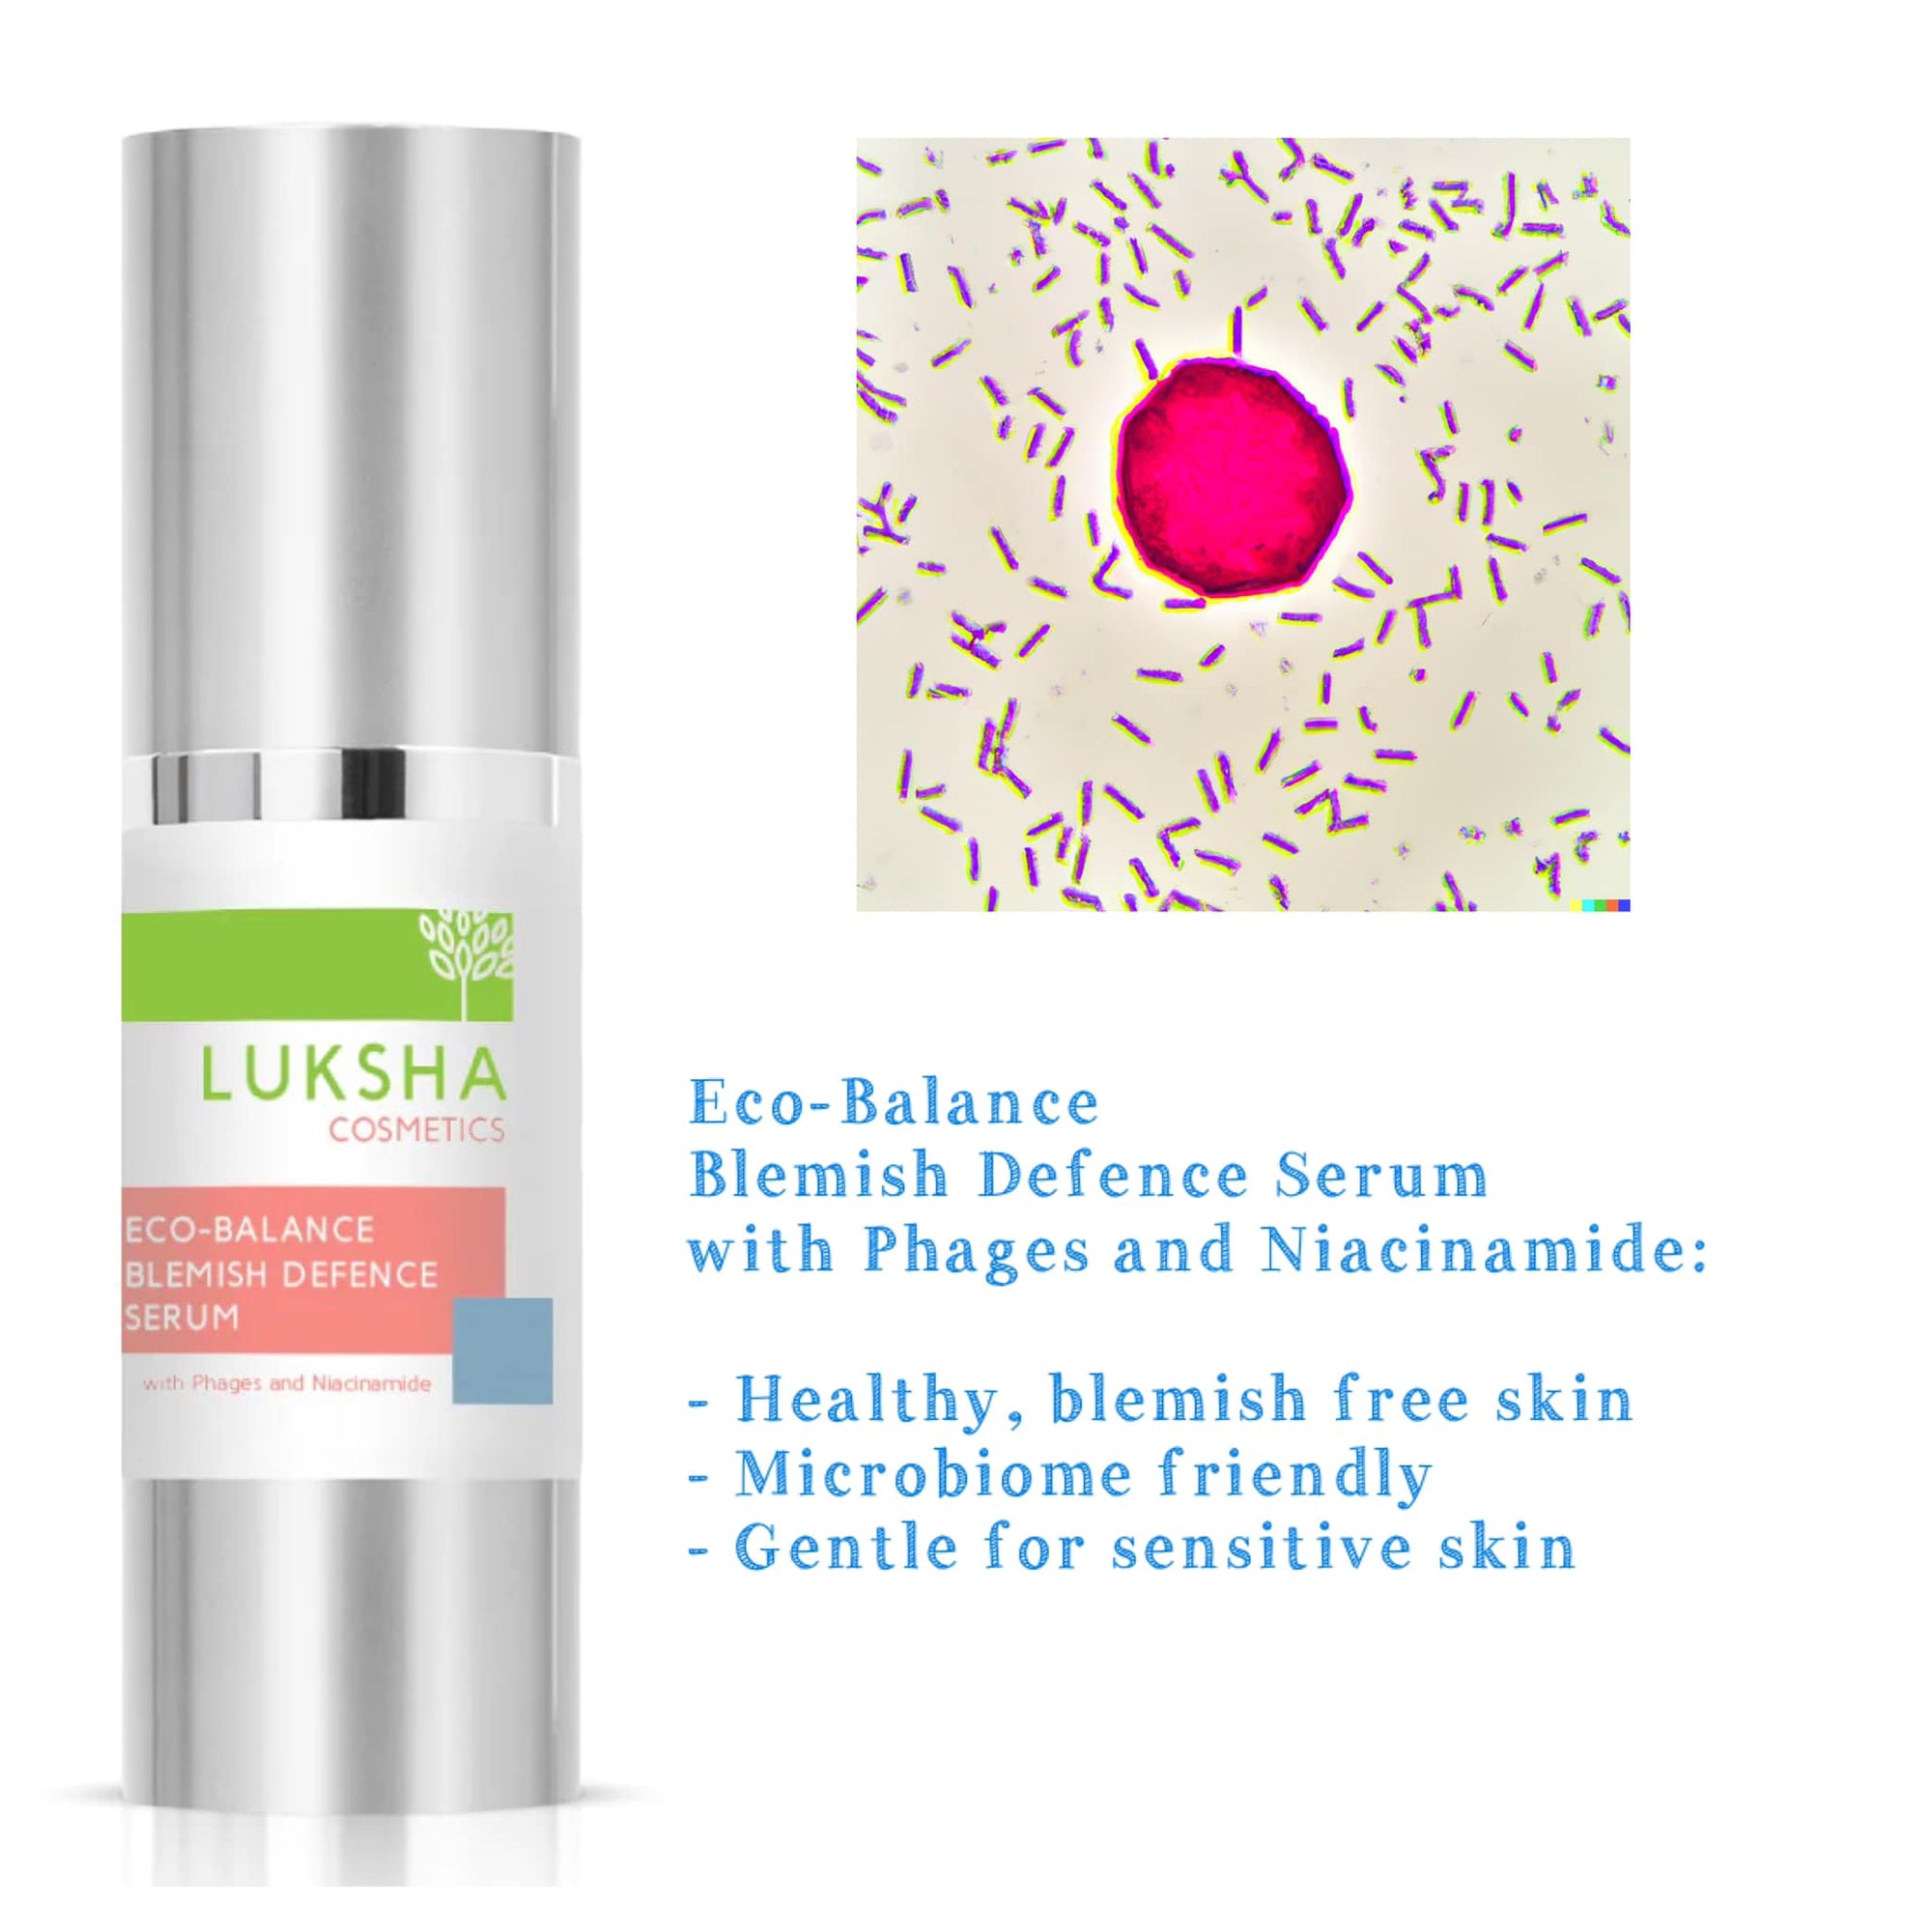 New Innovative, Microbiome Friendly Formula for Blemish Prone Skin